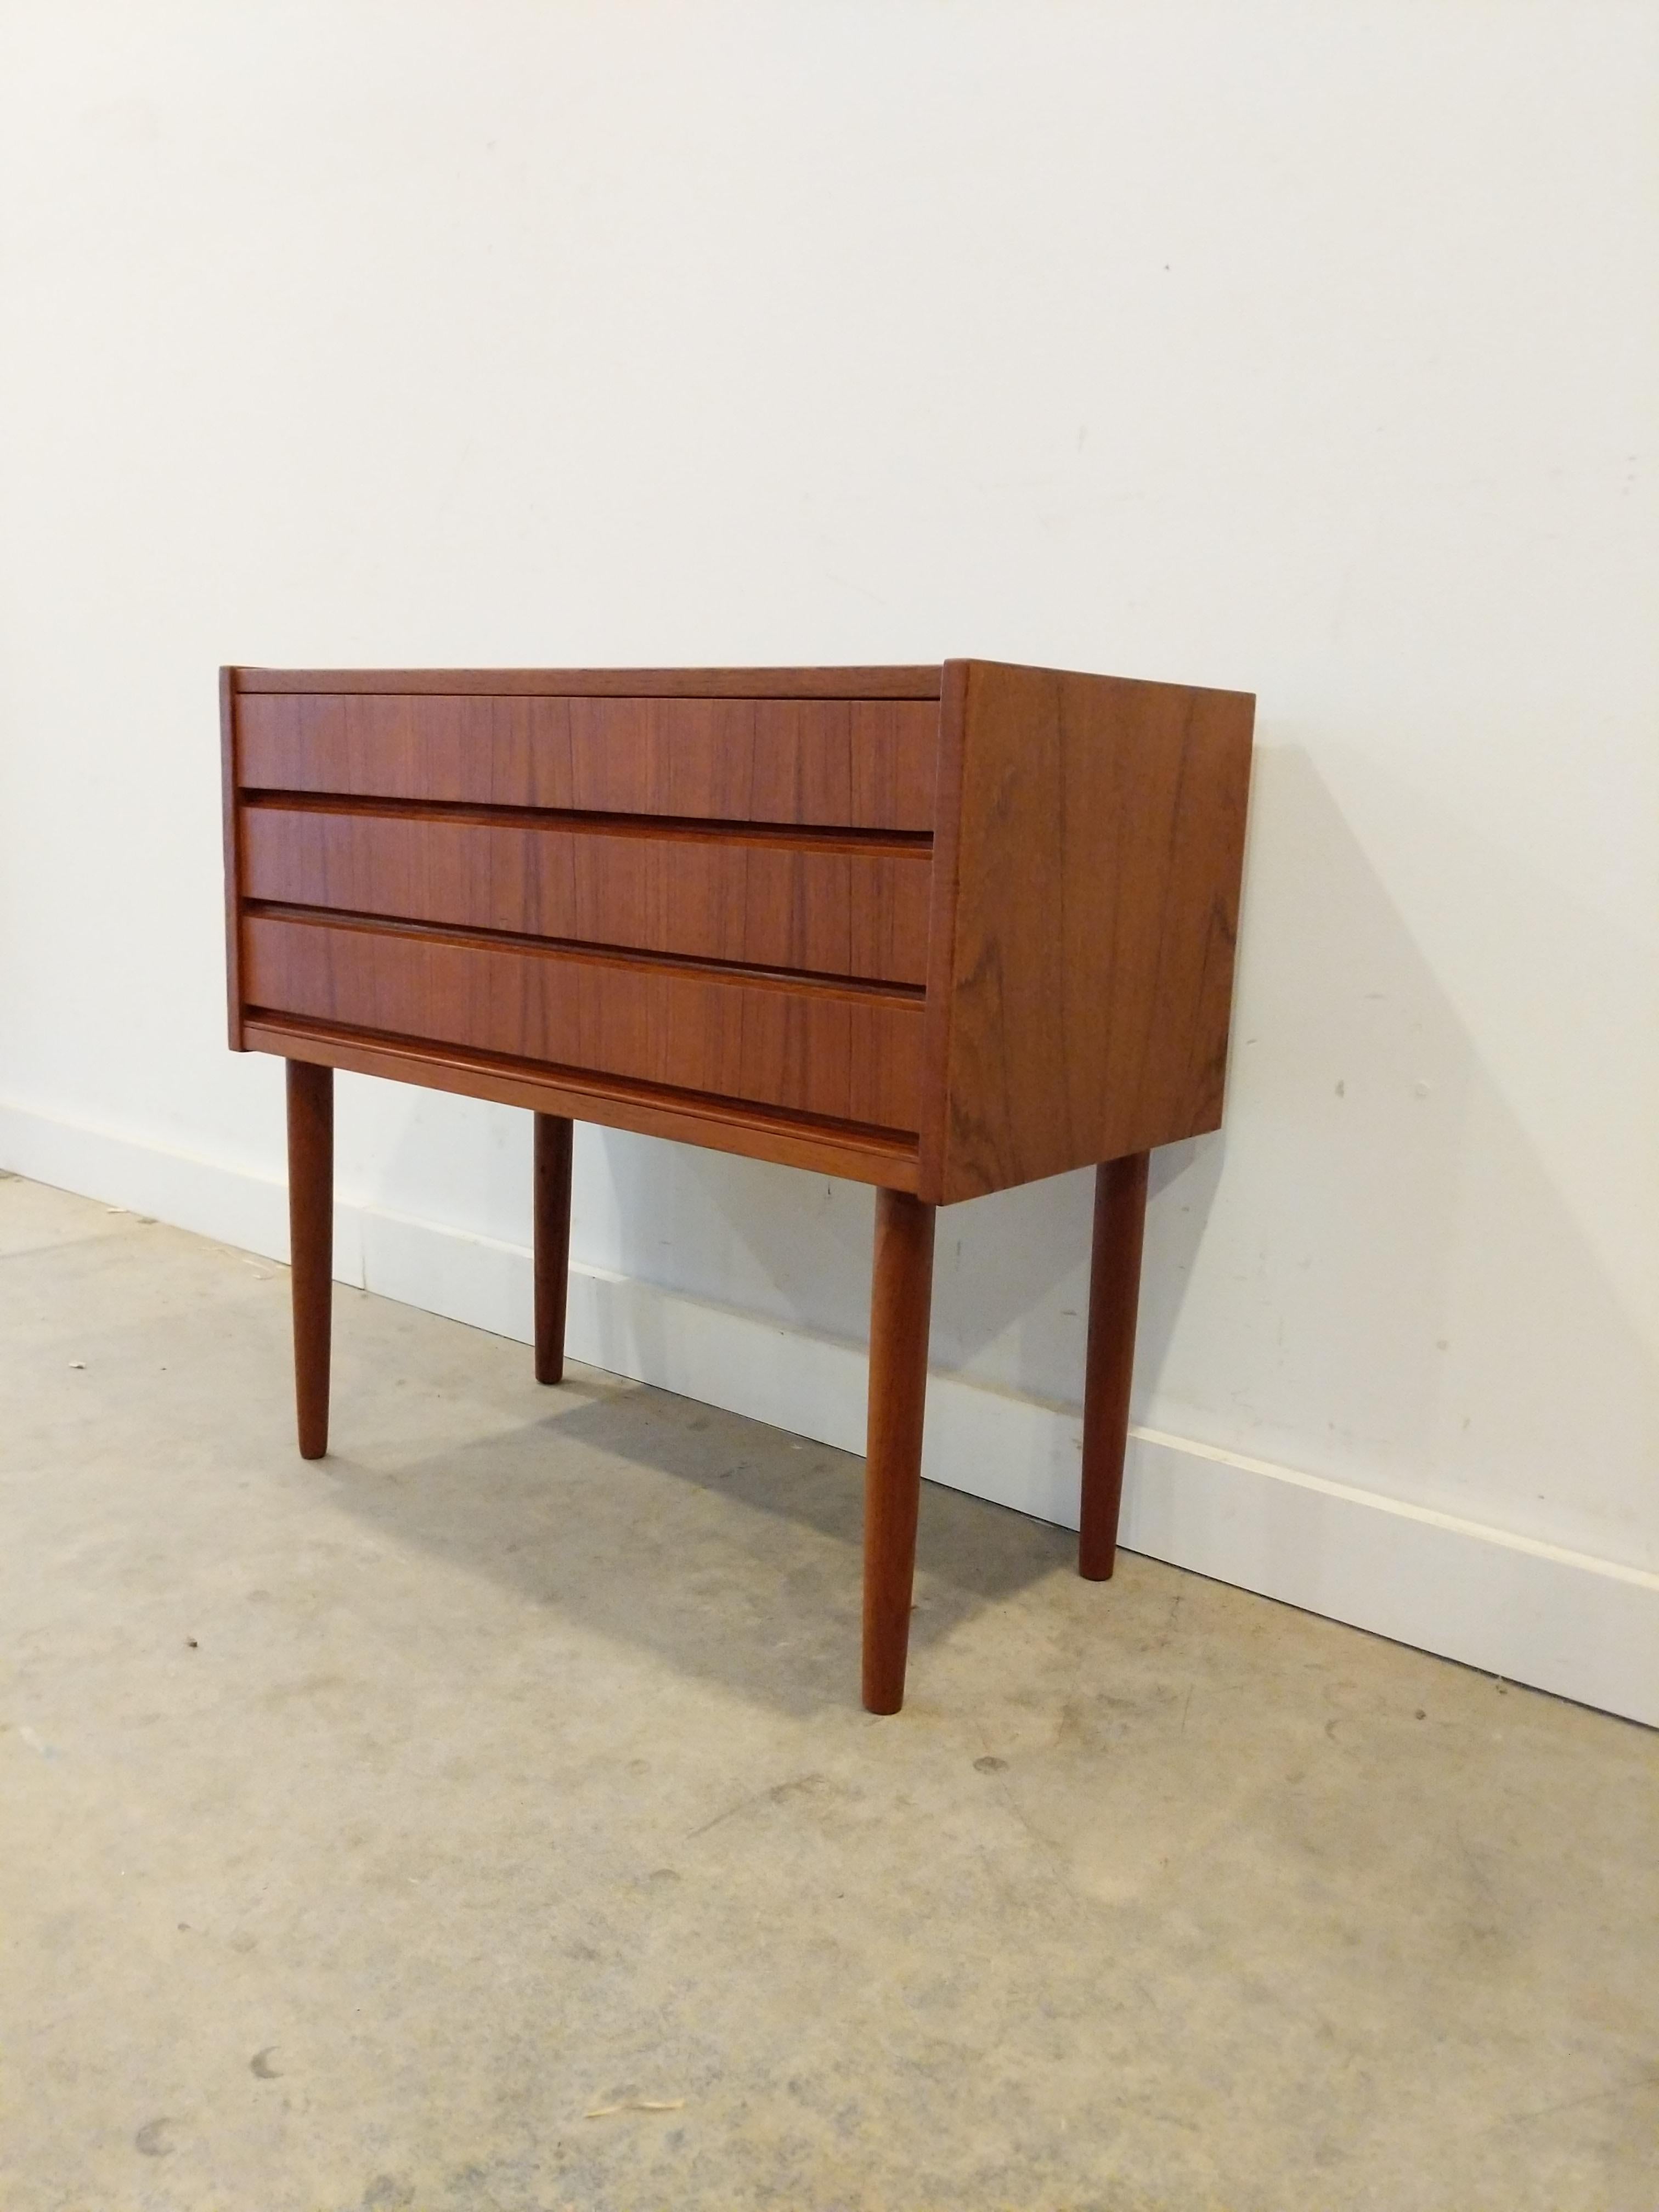 Authentic vintage mid century Danish / Scandinavian Modern teak nightstand / side table / low chest of drawers.

This piece is in excellent refinished condition with very few signs of age-related wear (see photos).

If you would like any additional